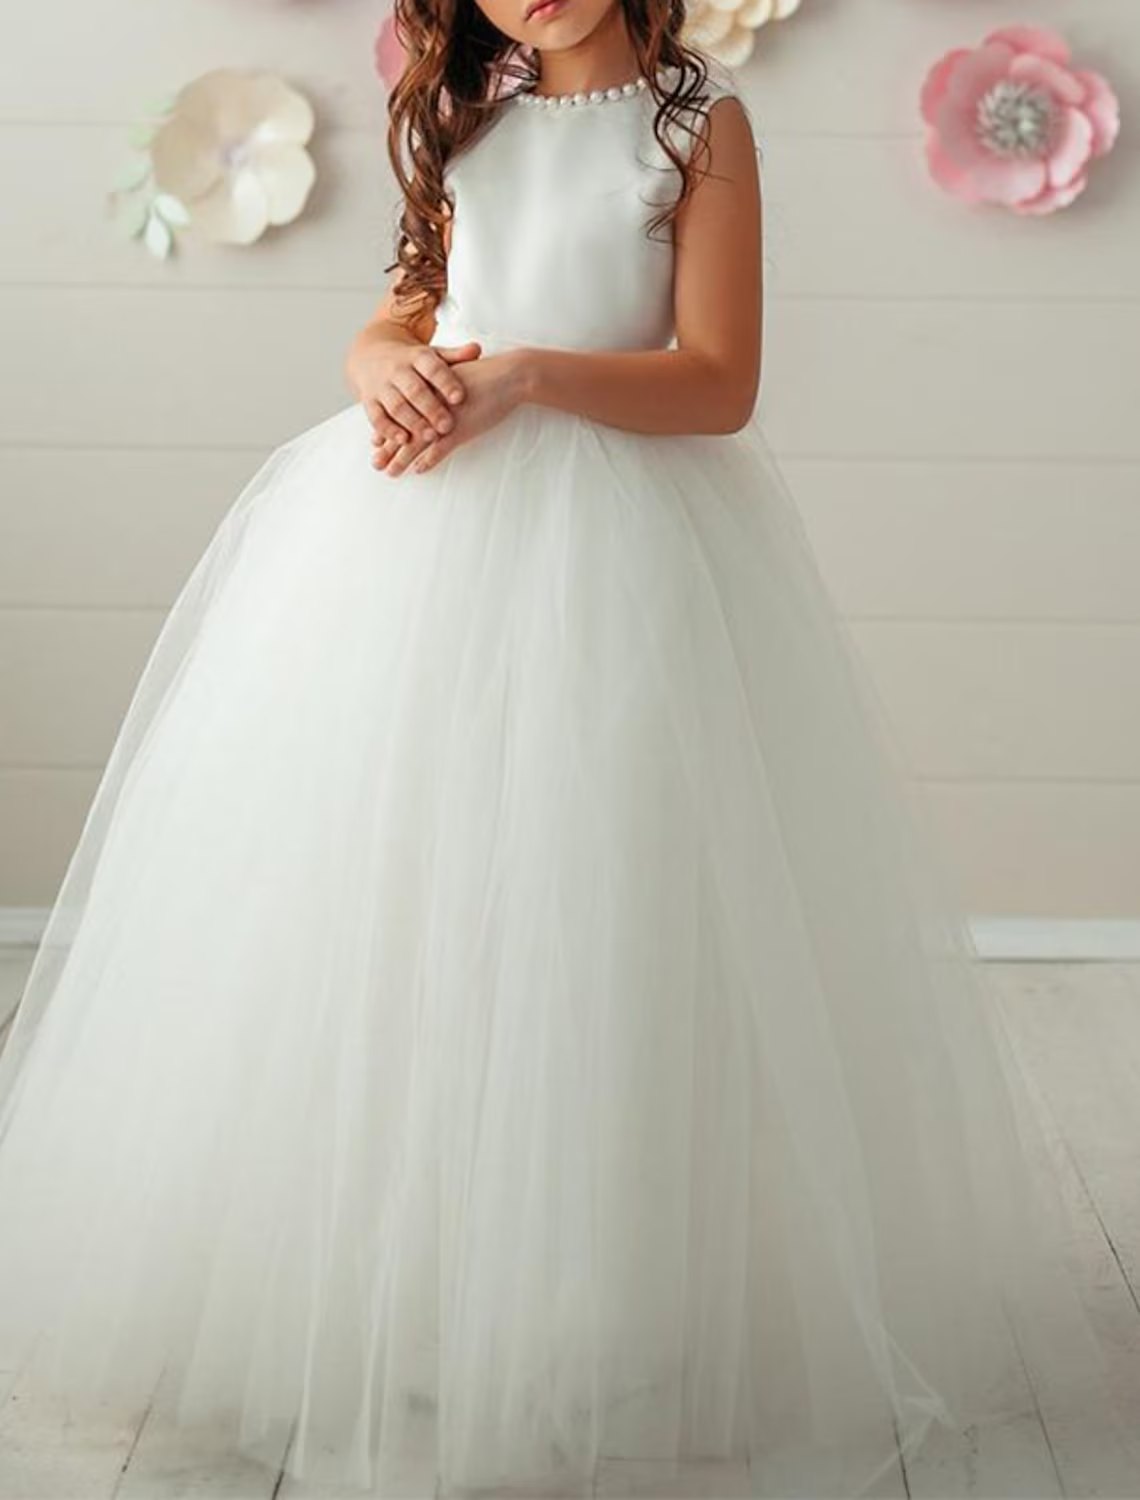 Ball Gown Floor Length Flower Girl Dress First Communion Girls Cute Prom Dress Satin with Bow(s) Open Back Fit 3-16 Years